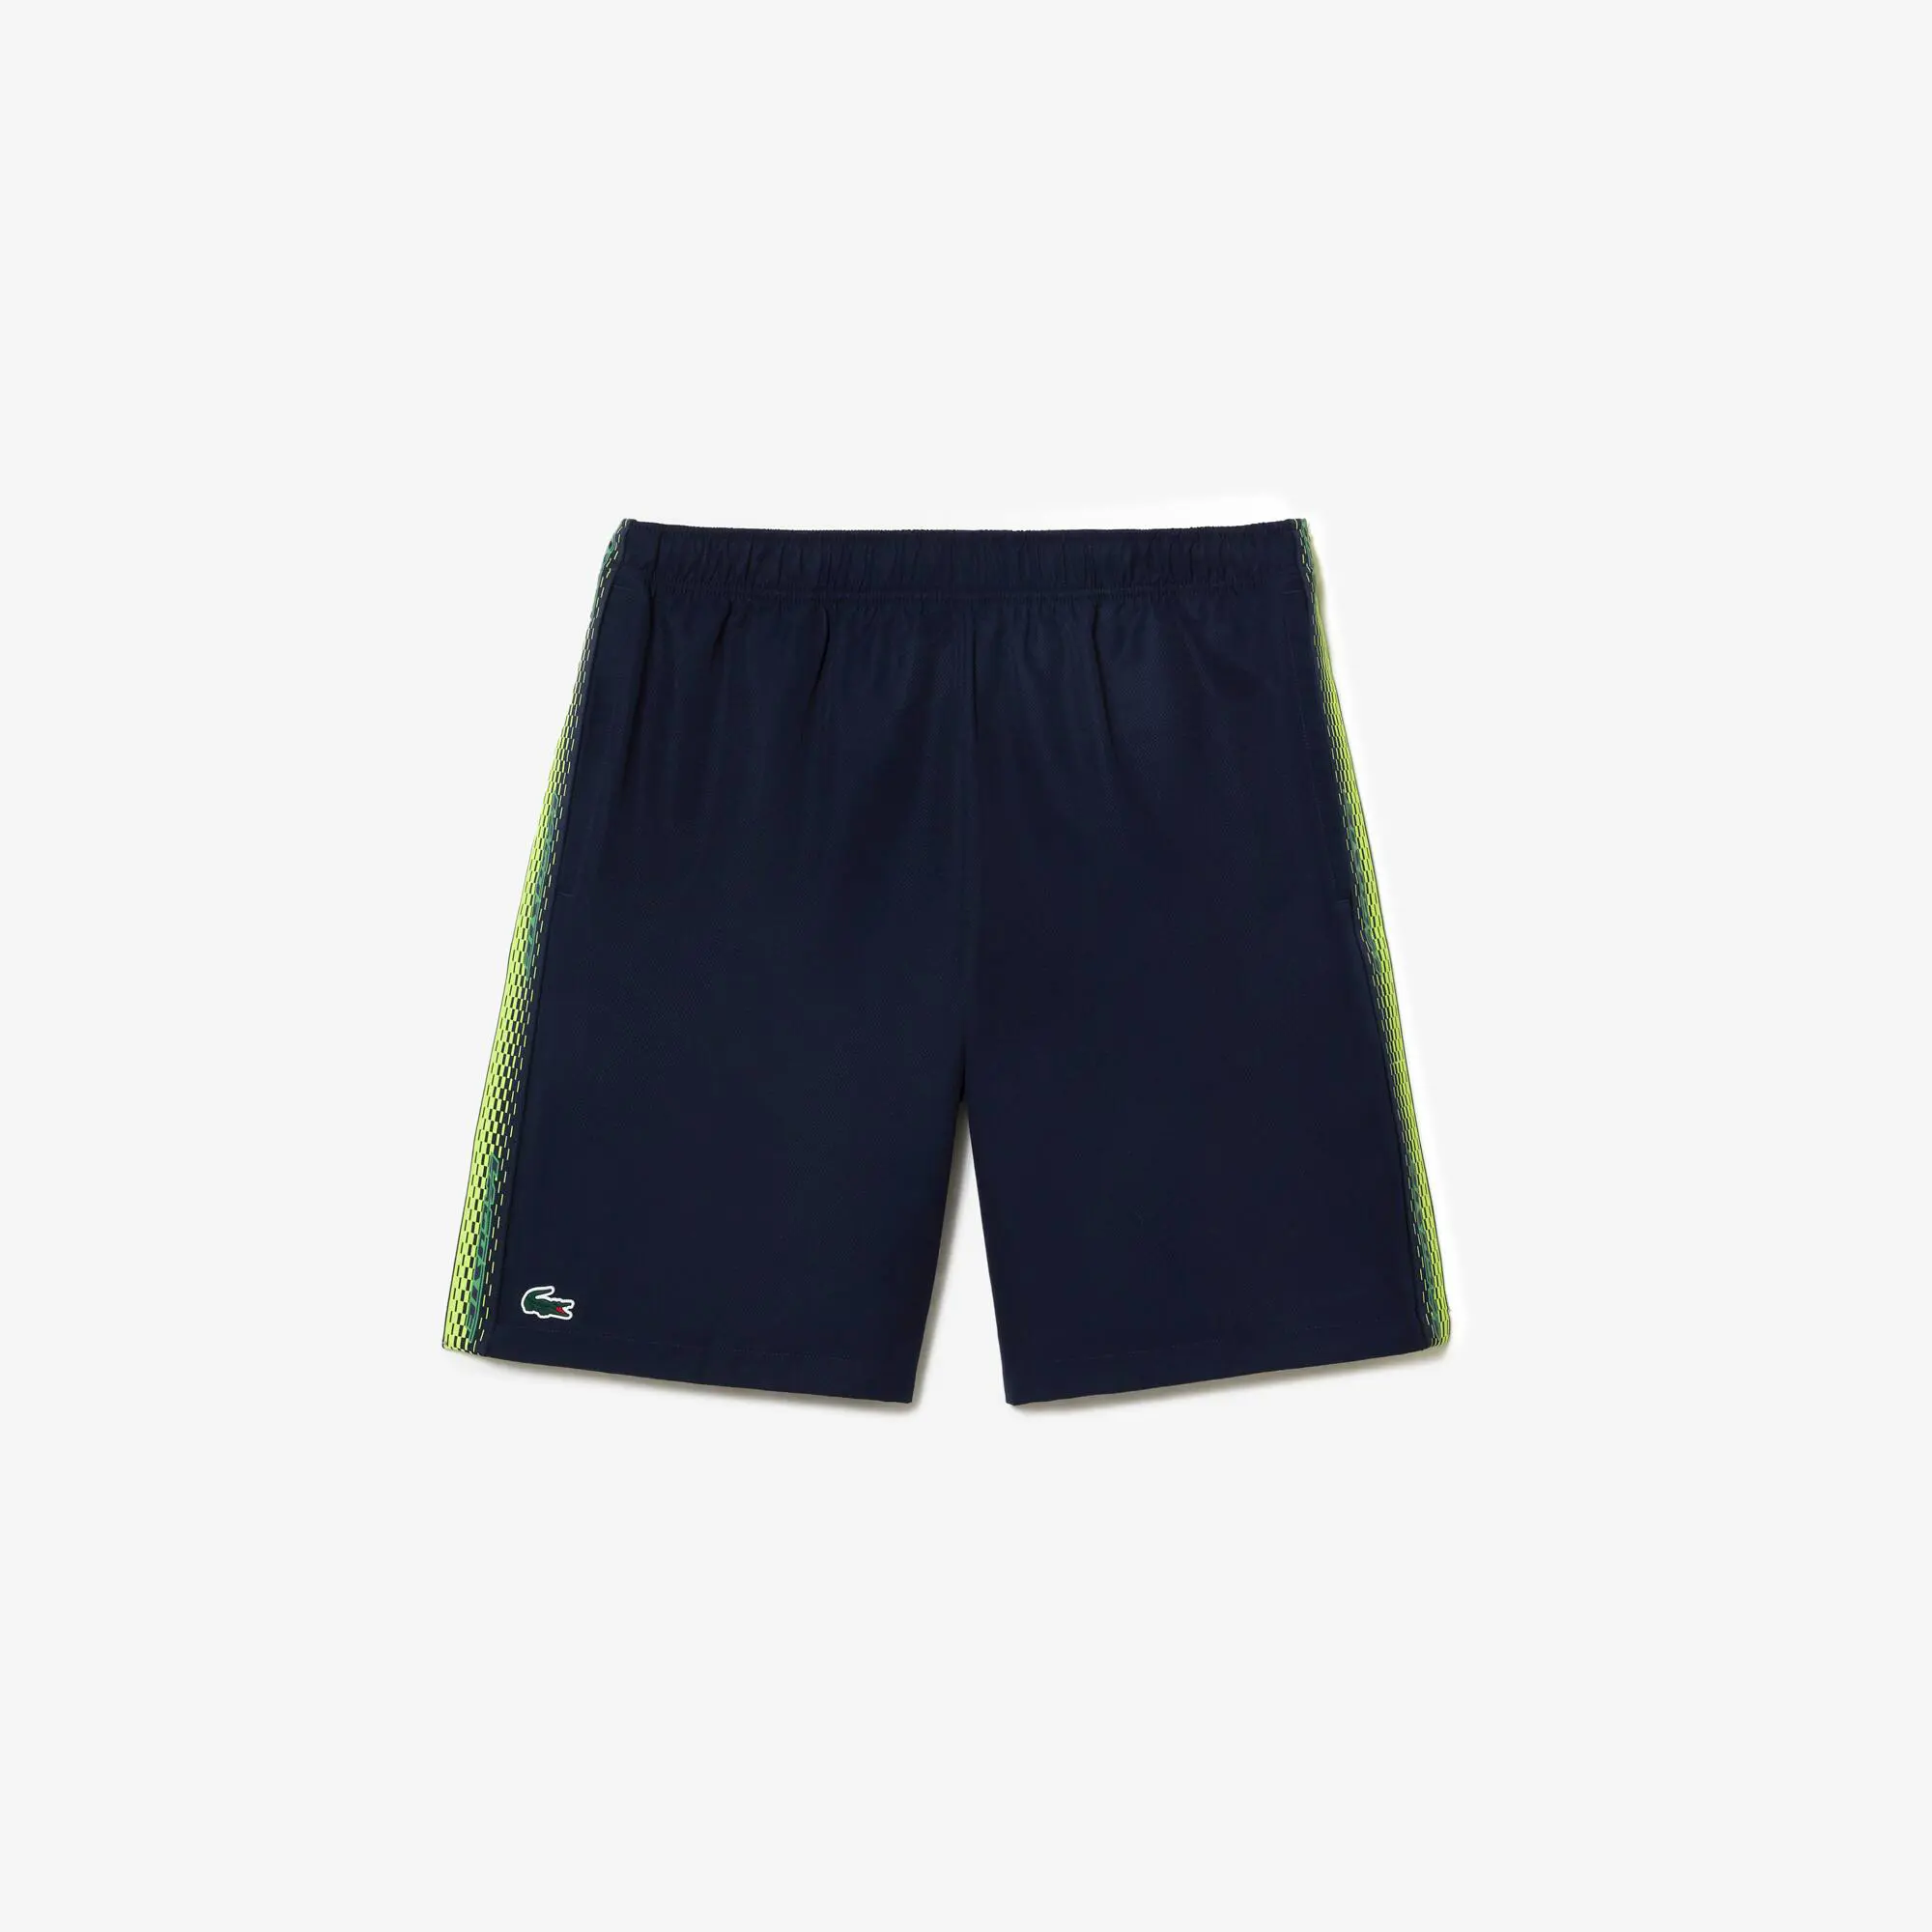 Lacoste Men’s Lacoste Recycled Polyester Tennis Shorts. 1